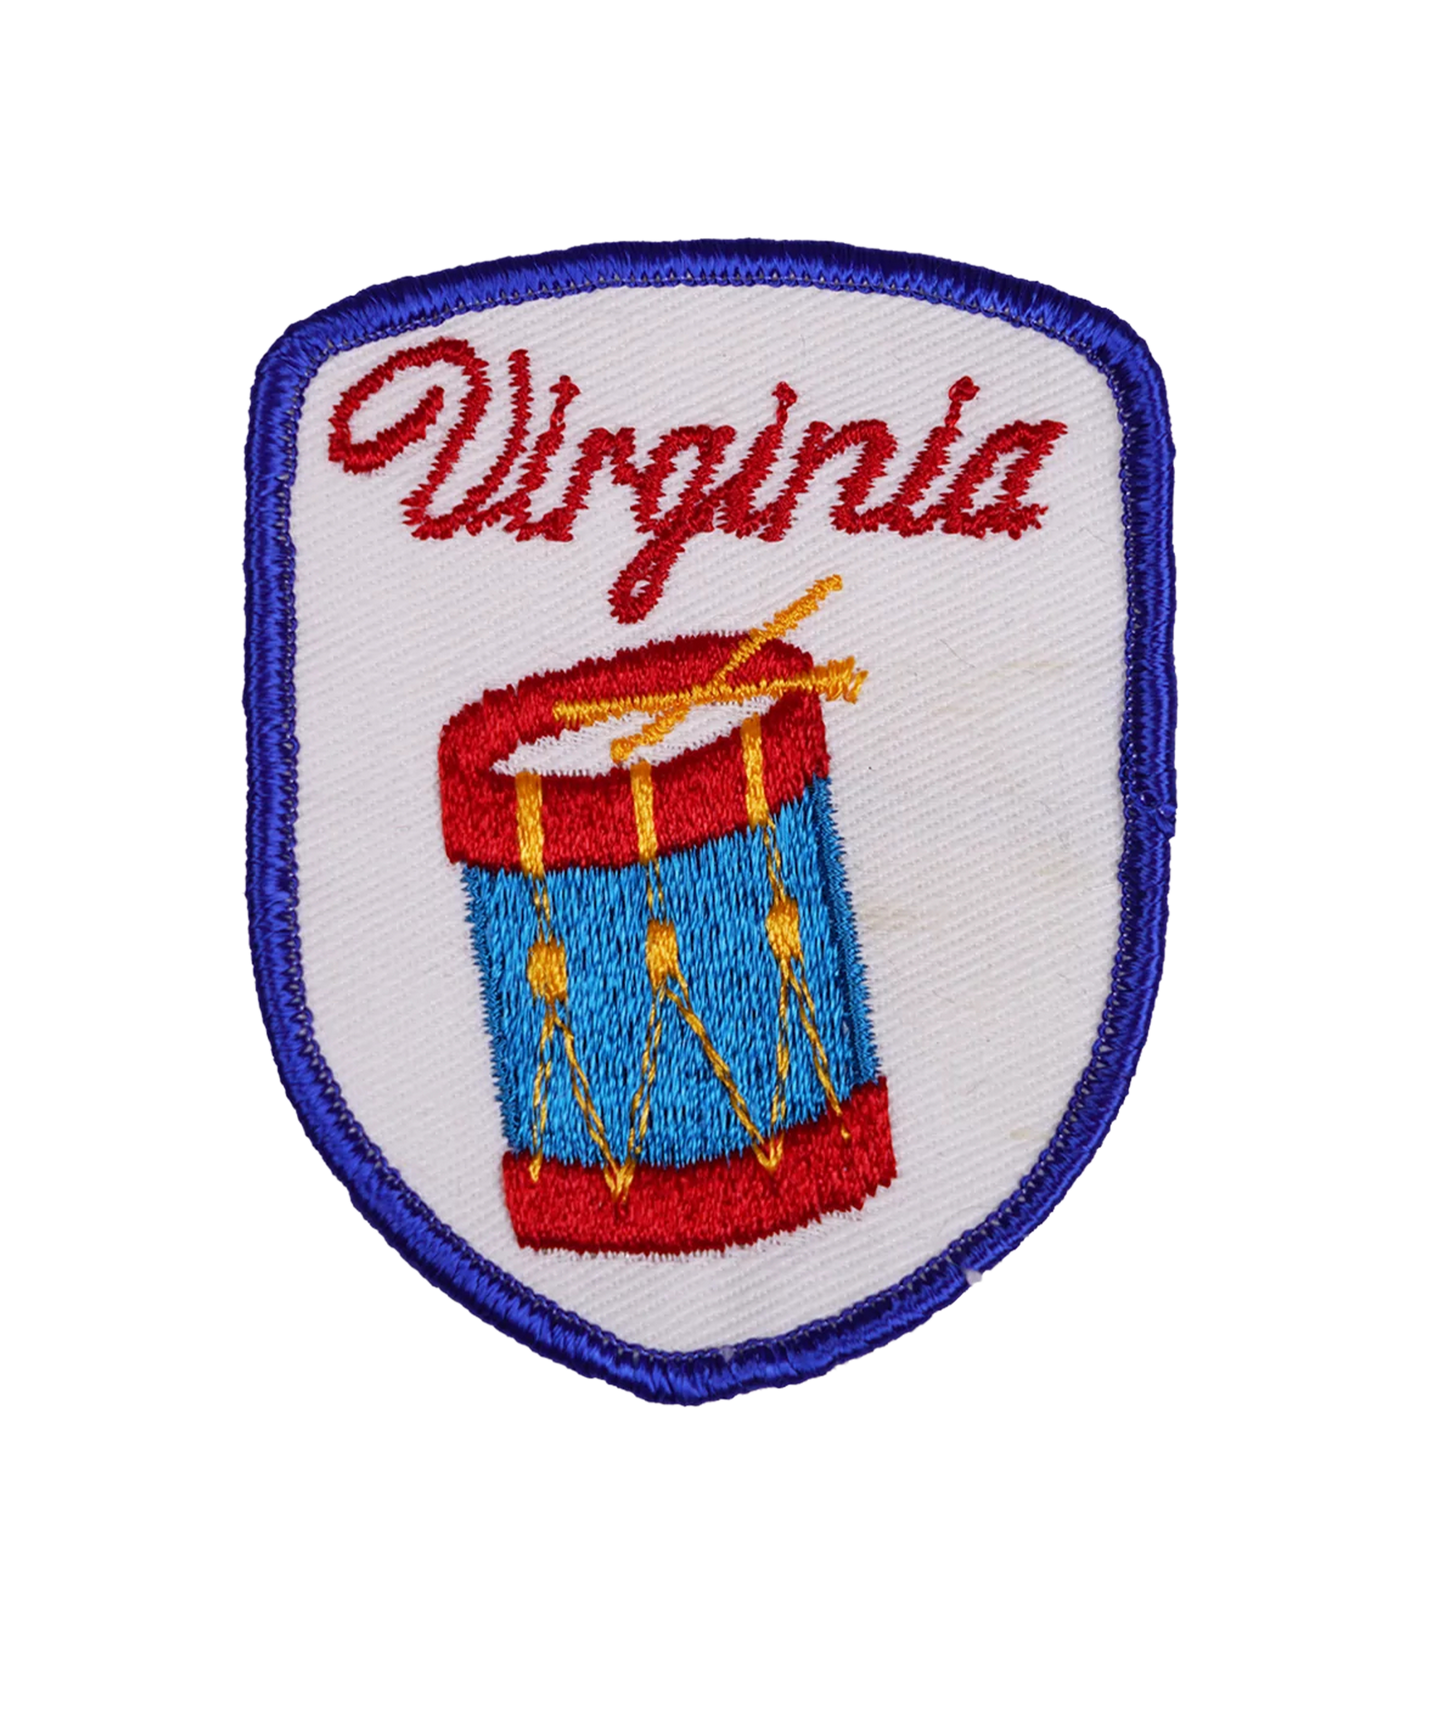 Vintage Virginia Embroidered Patch